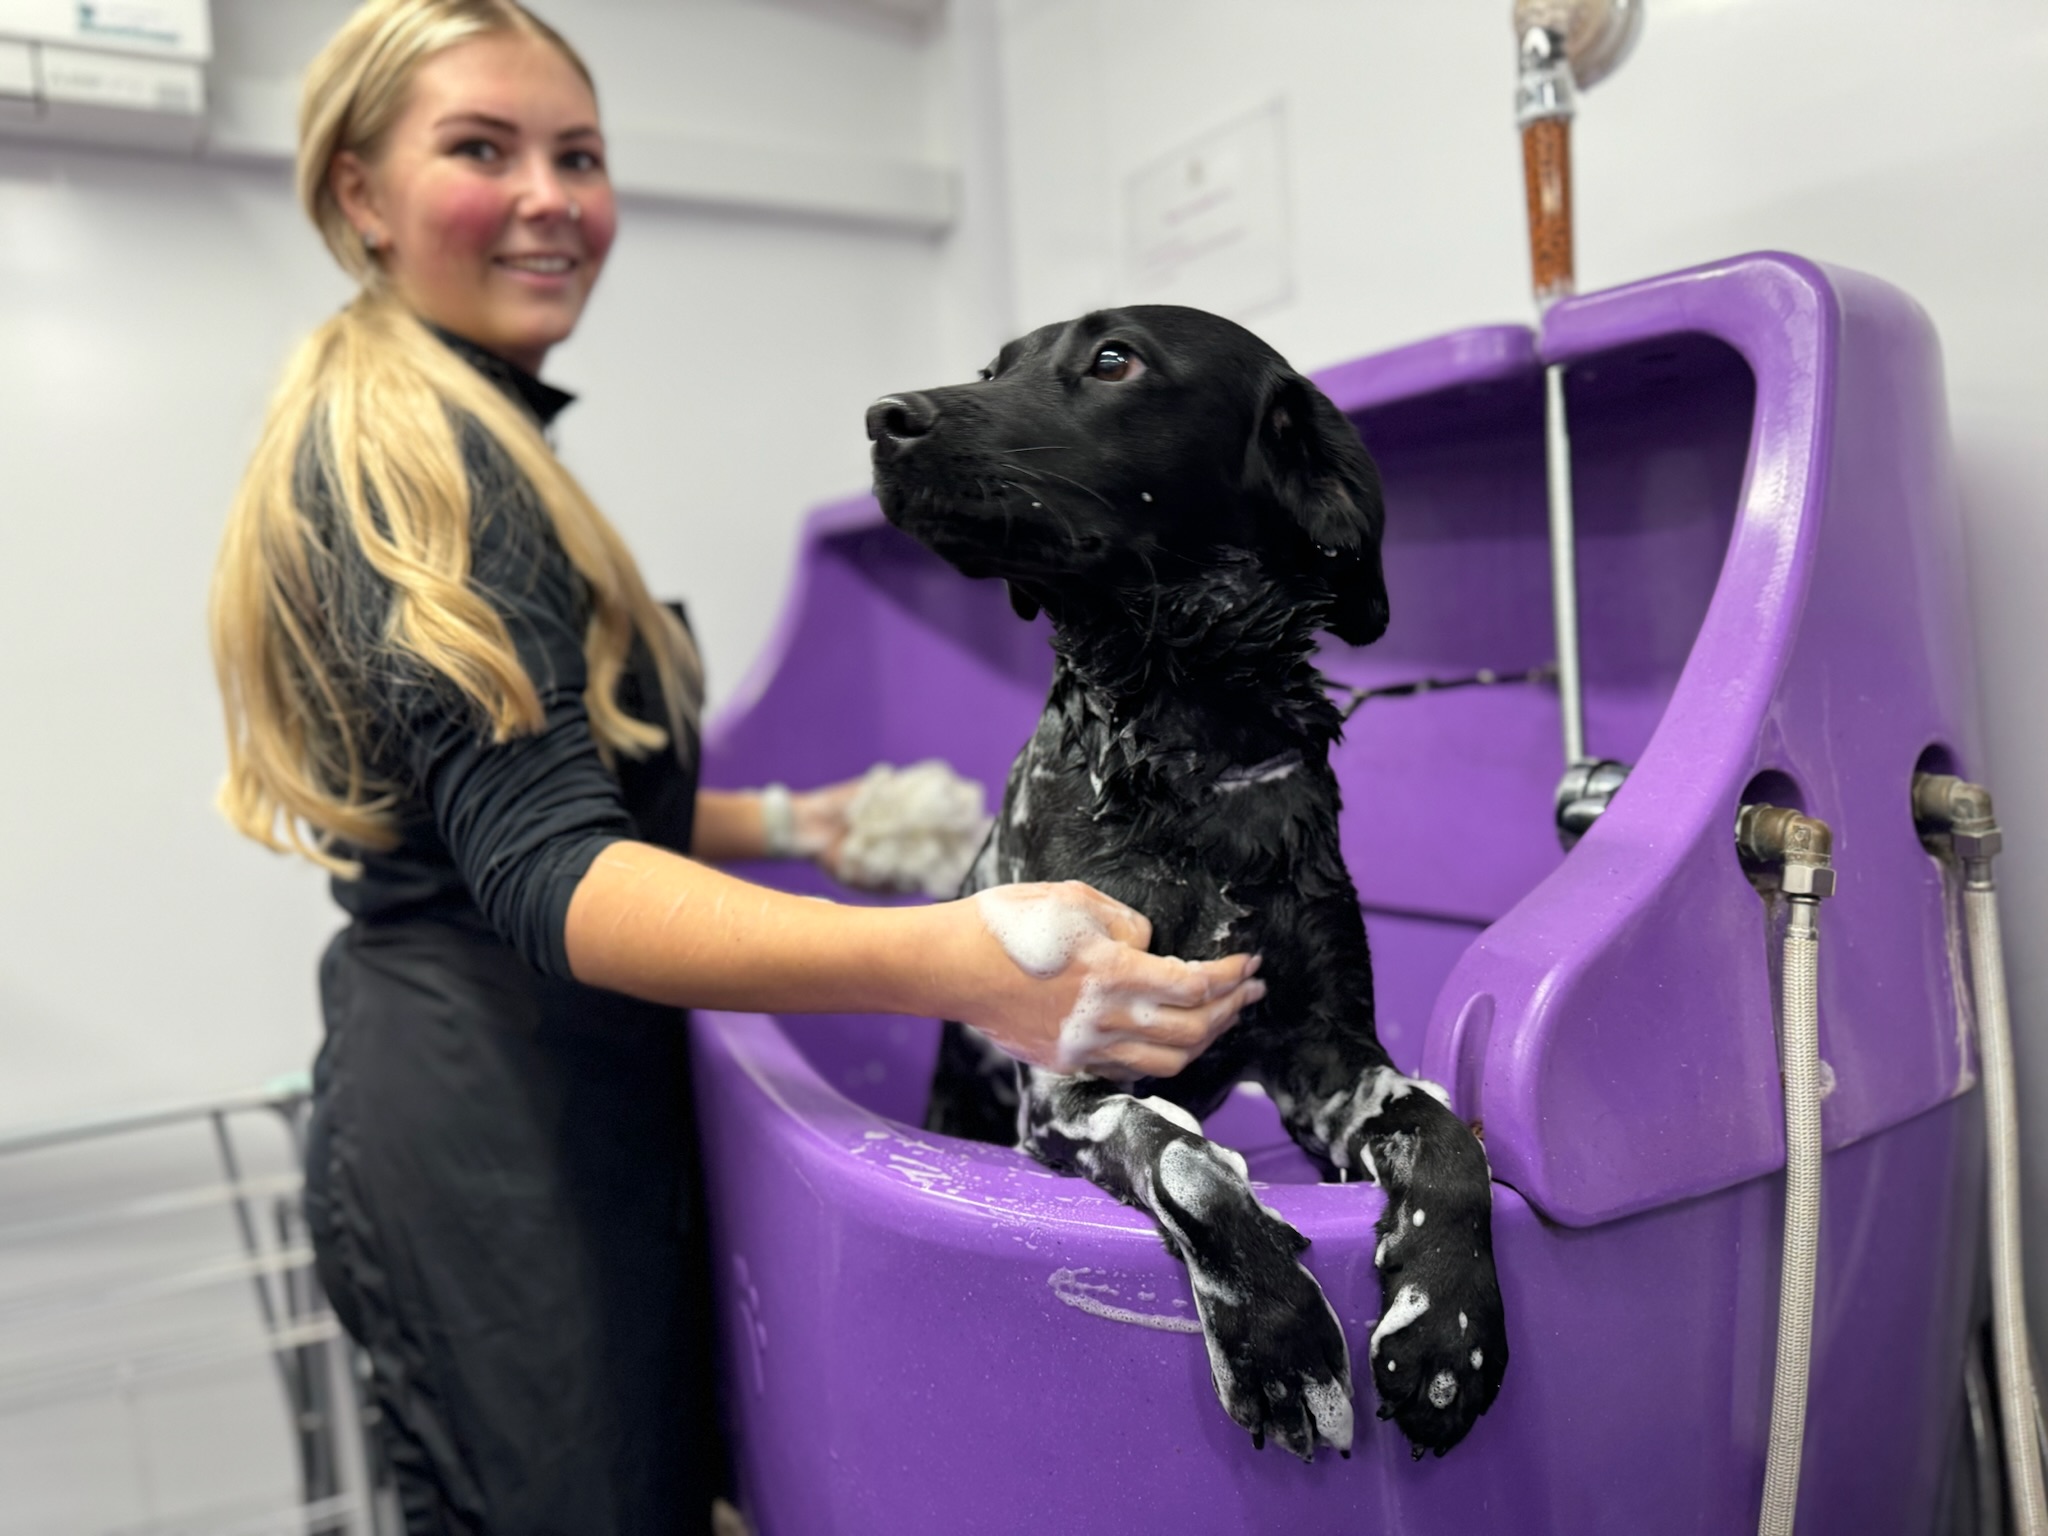 Dog Grooming Course, Dog Grooming Student bathing Dog